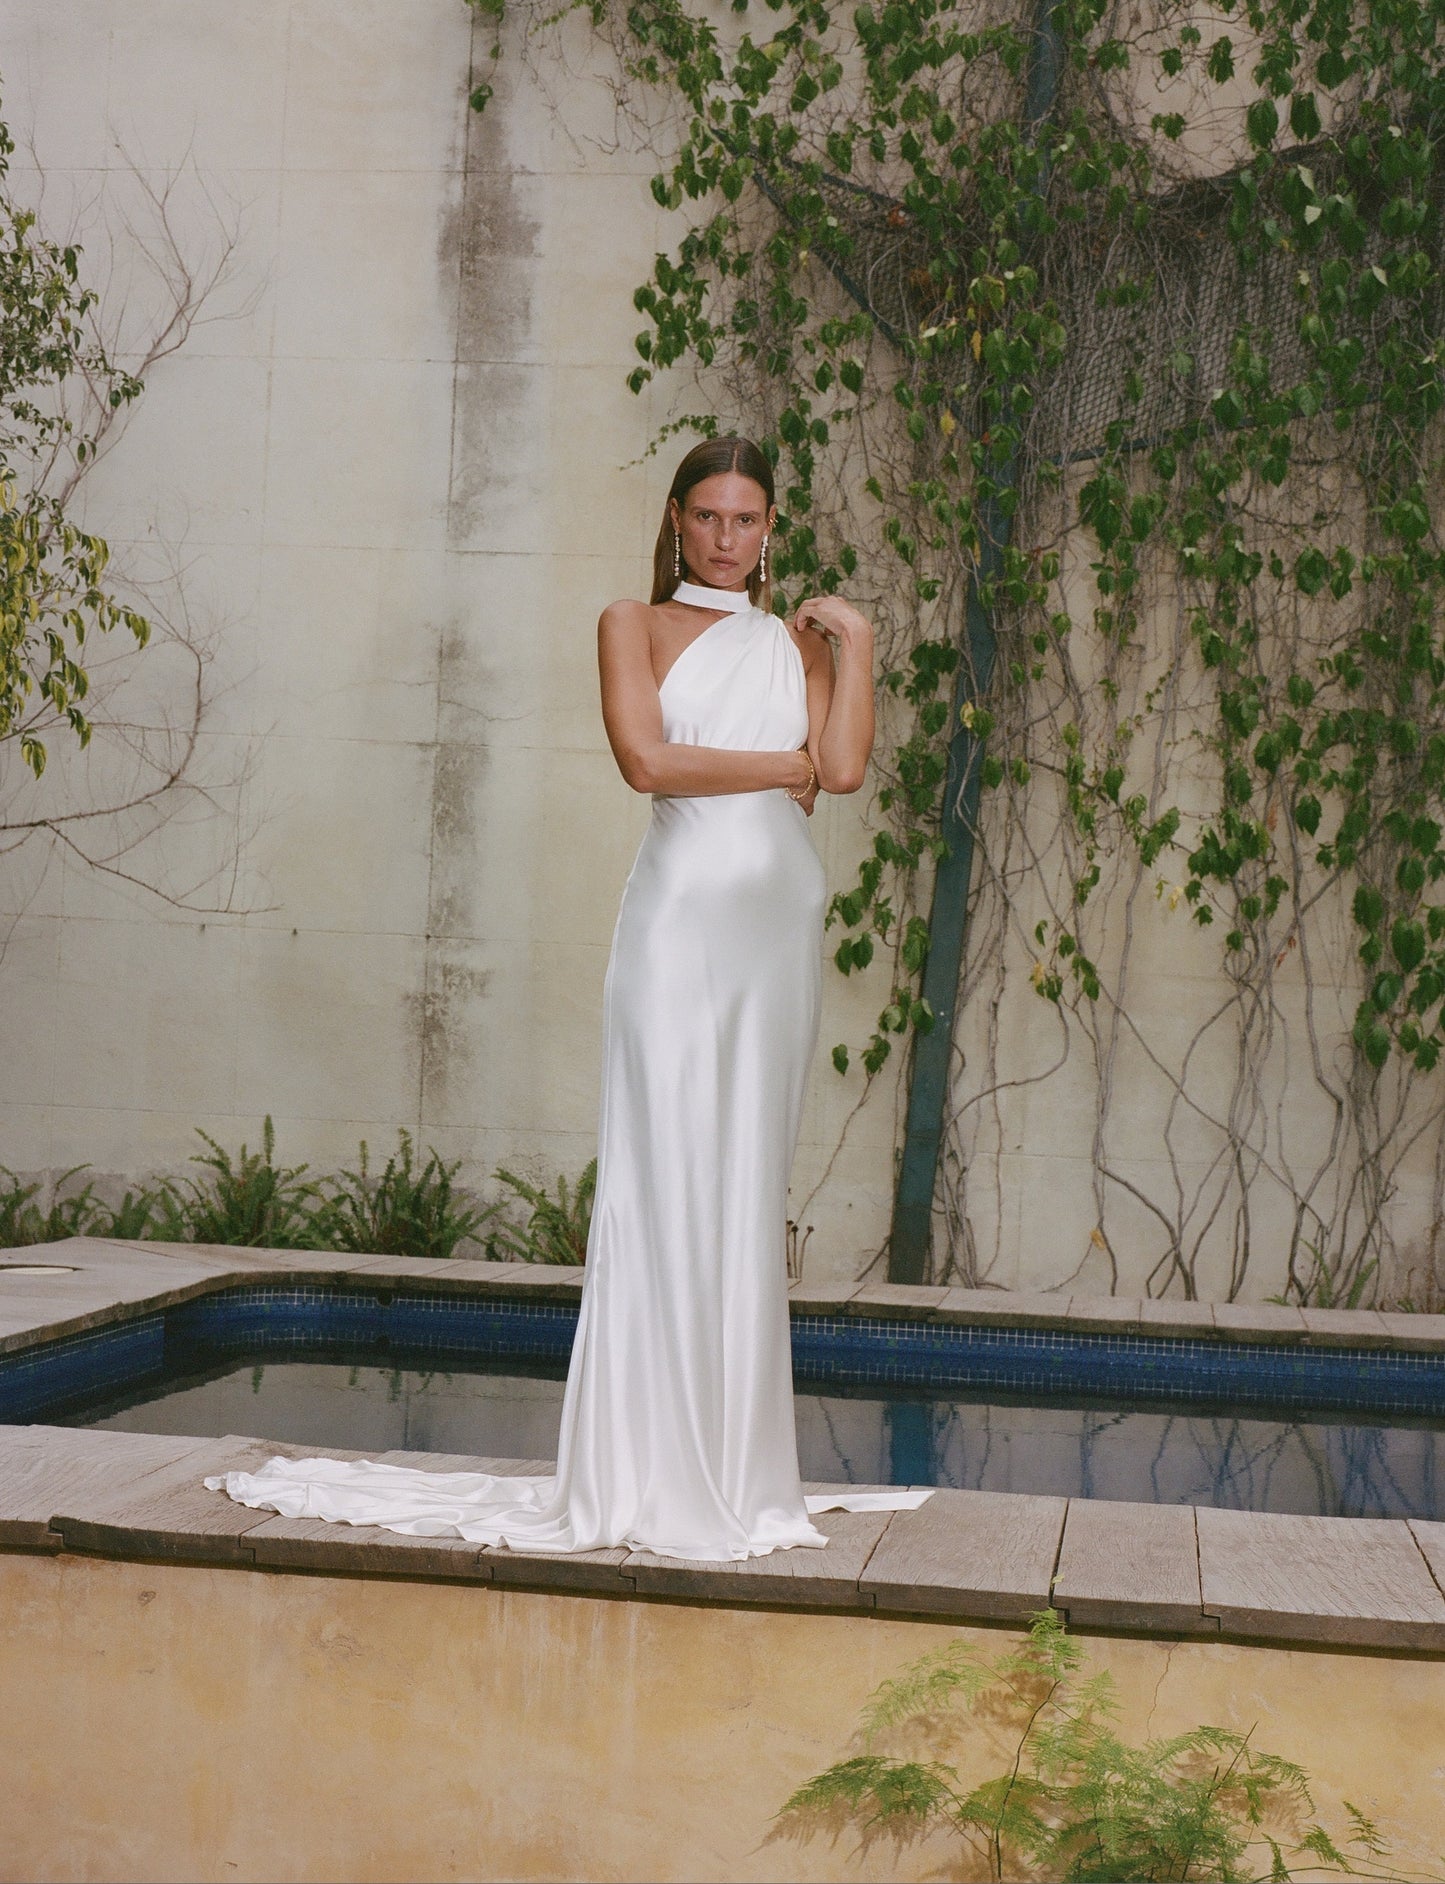 STYLE 016 // ONE SHOULDER HALTER WITH SASH AND SILK ORGANZA BACK DETAIL